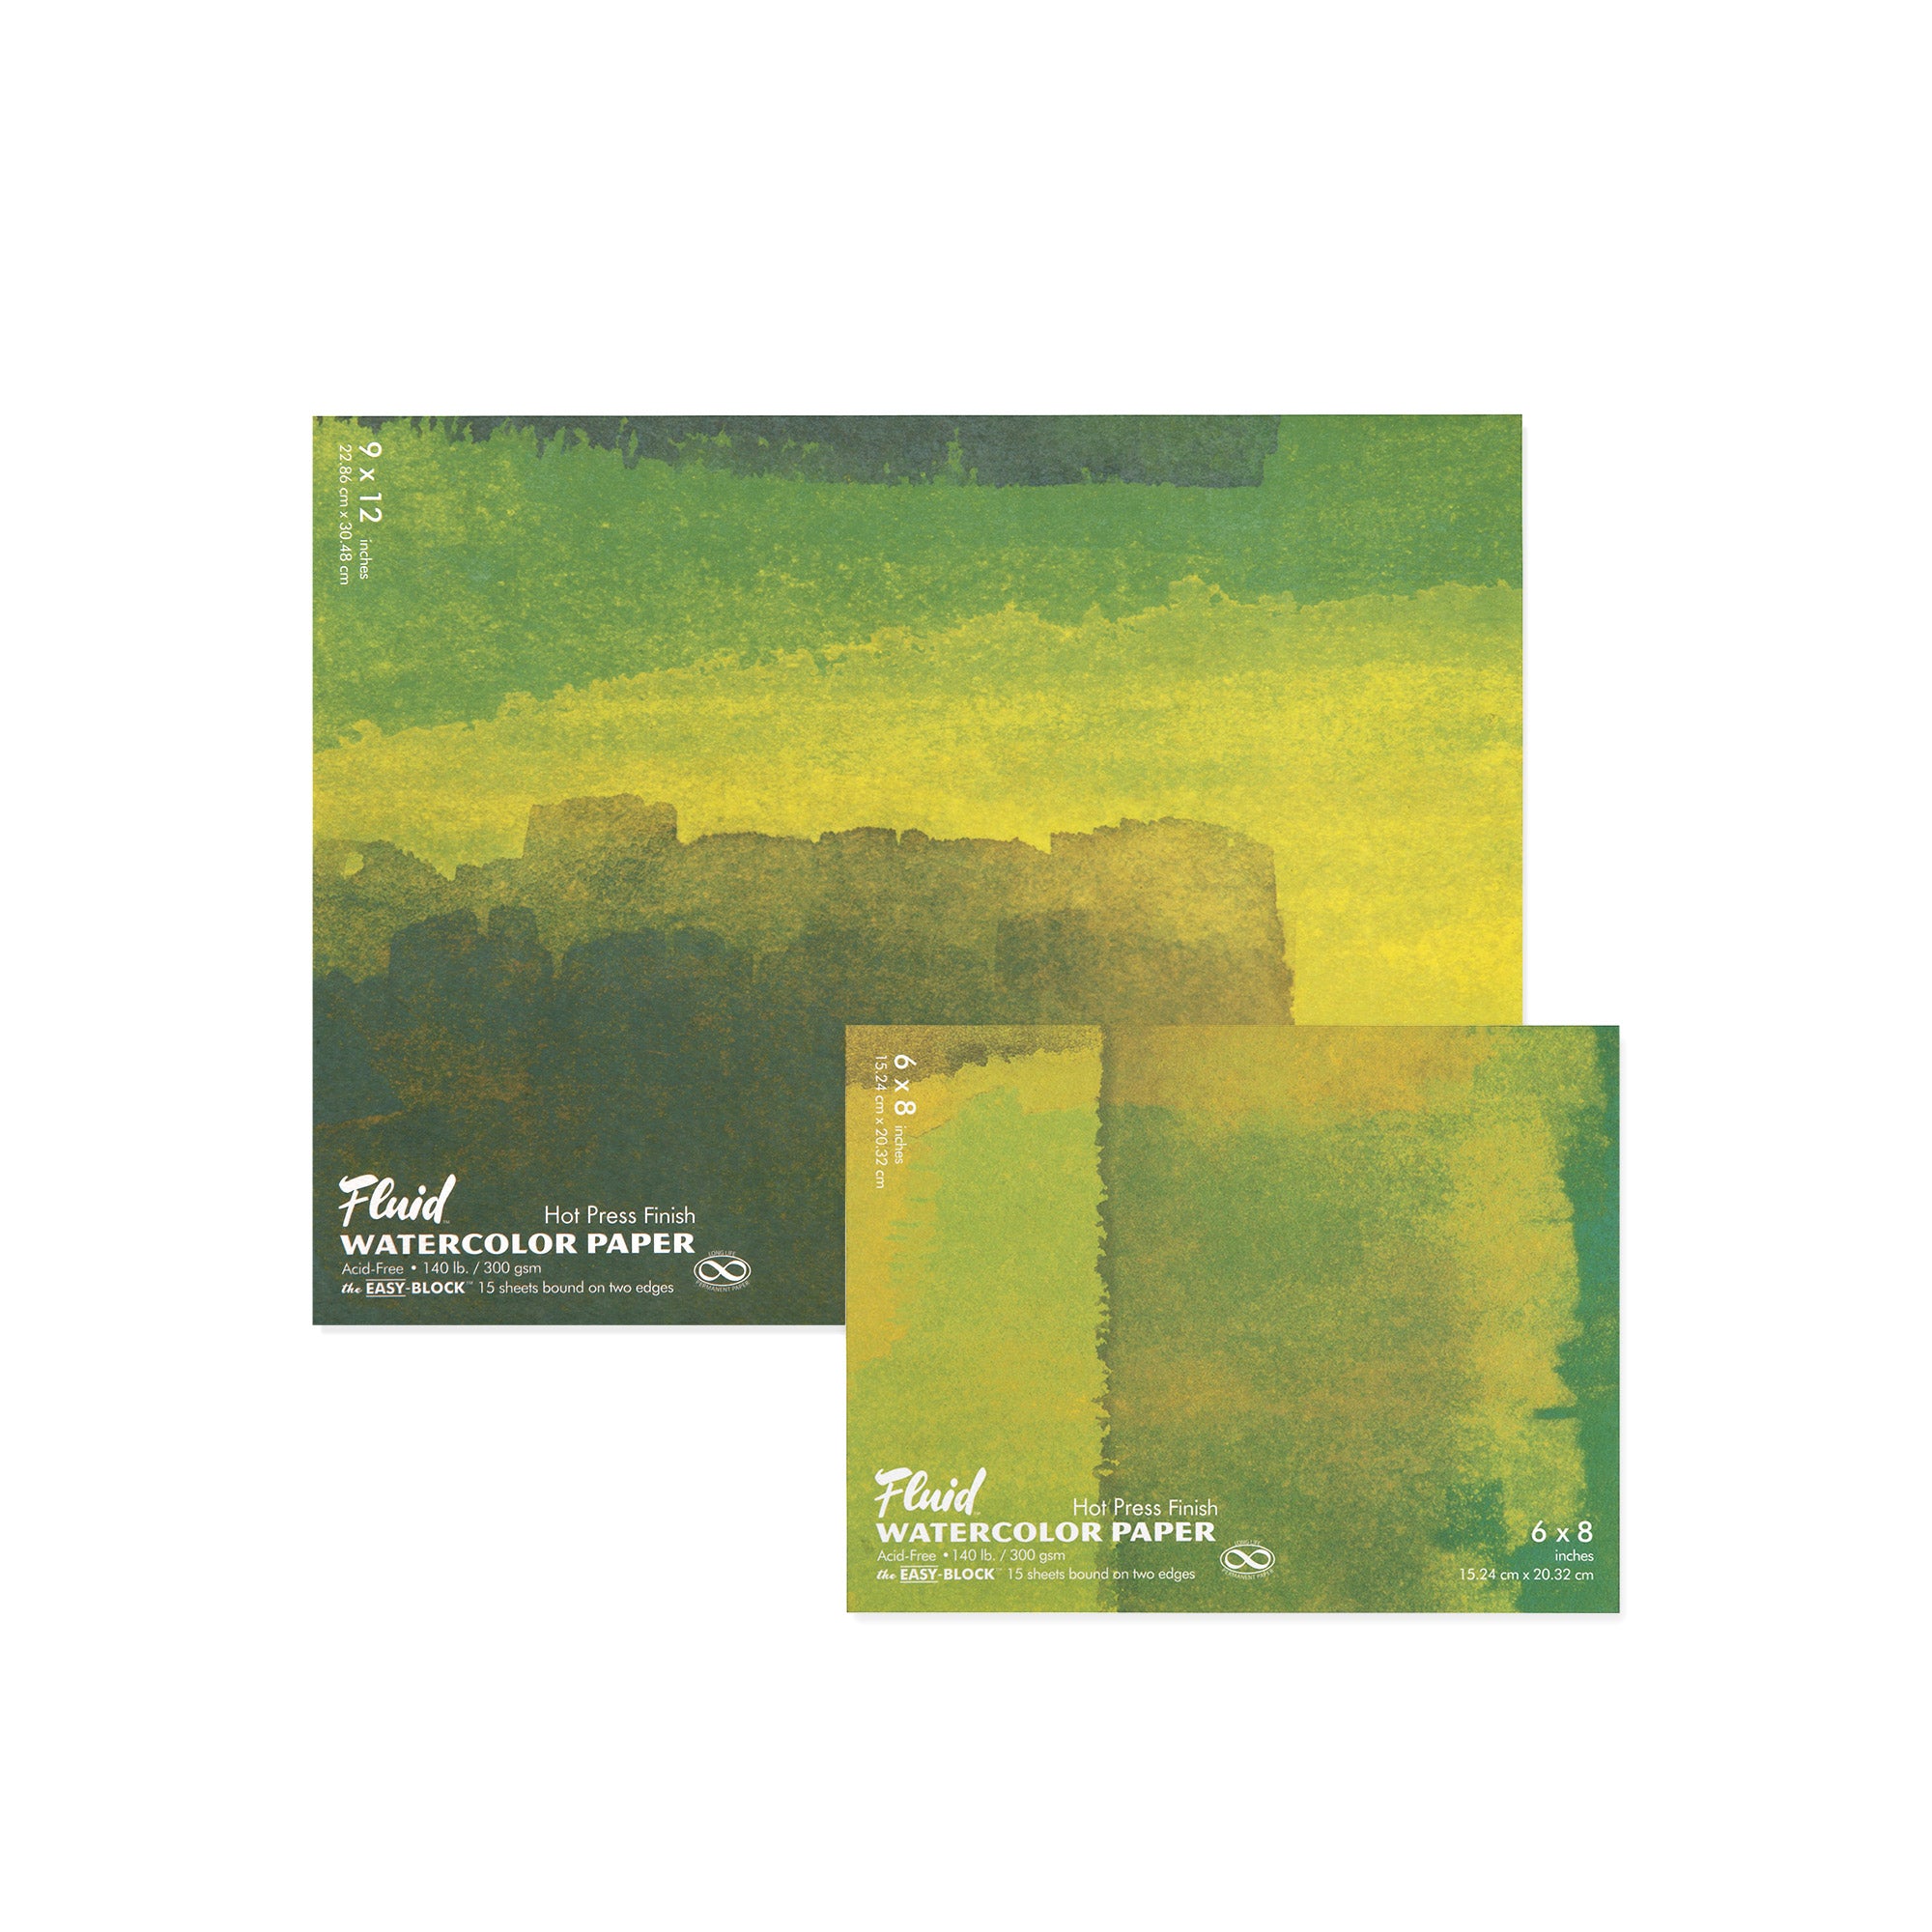 Fluid Cold Press Watercolor Paper 6 in. x 6 in., block (pack of 3) 